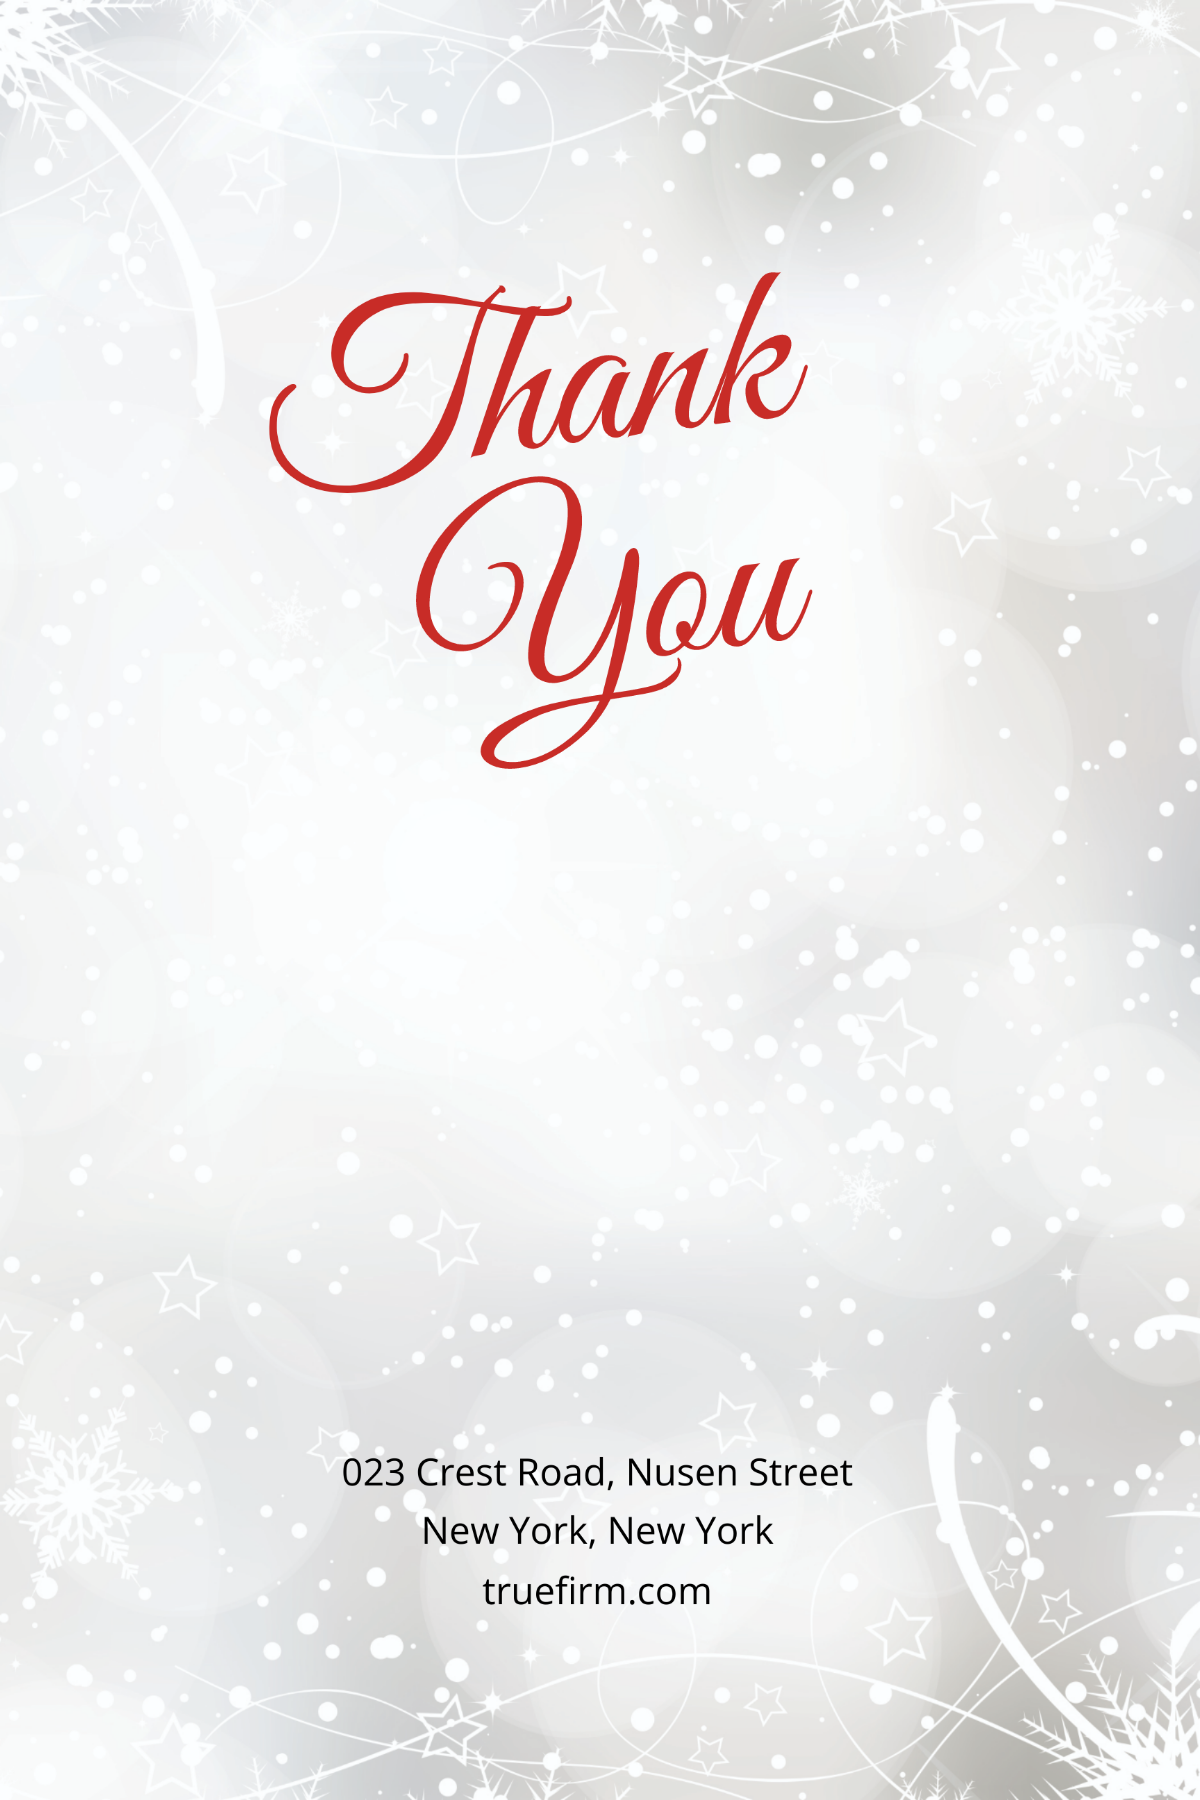 Merry Christmas Thank You Card Template